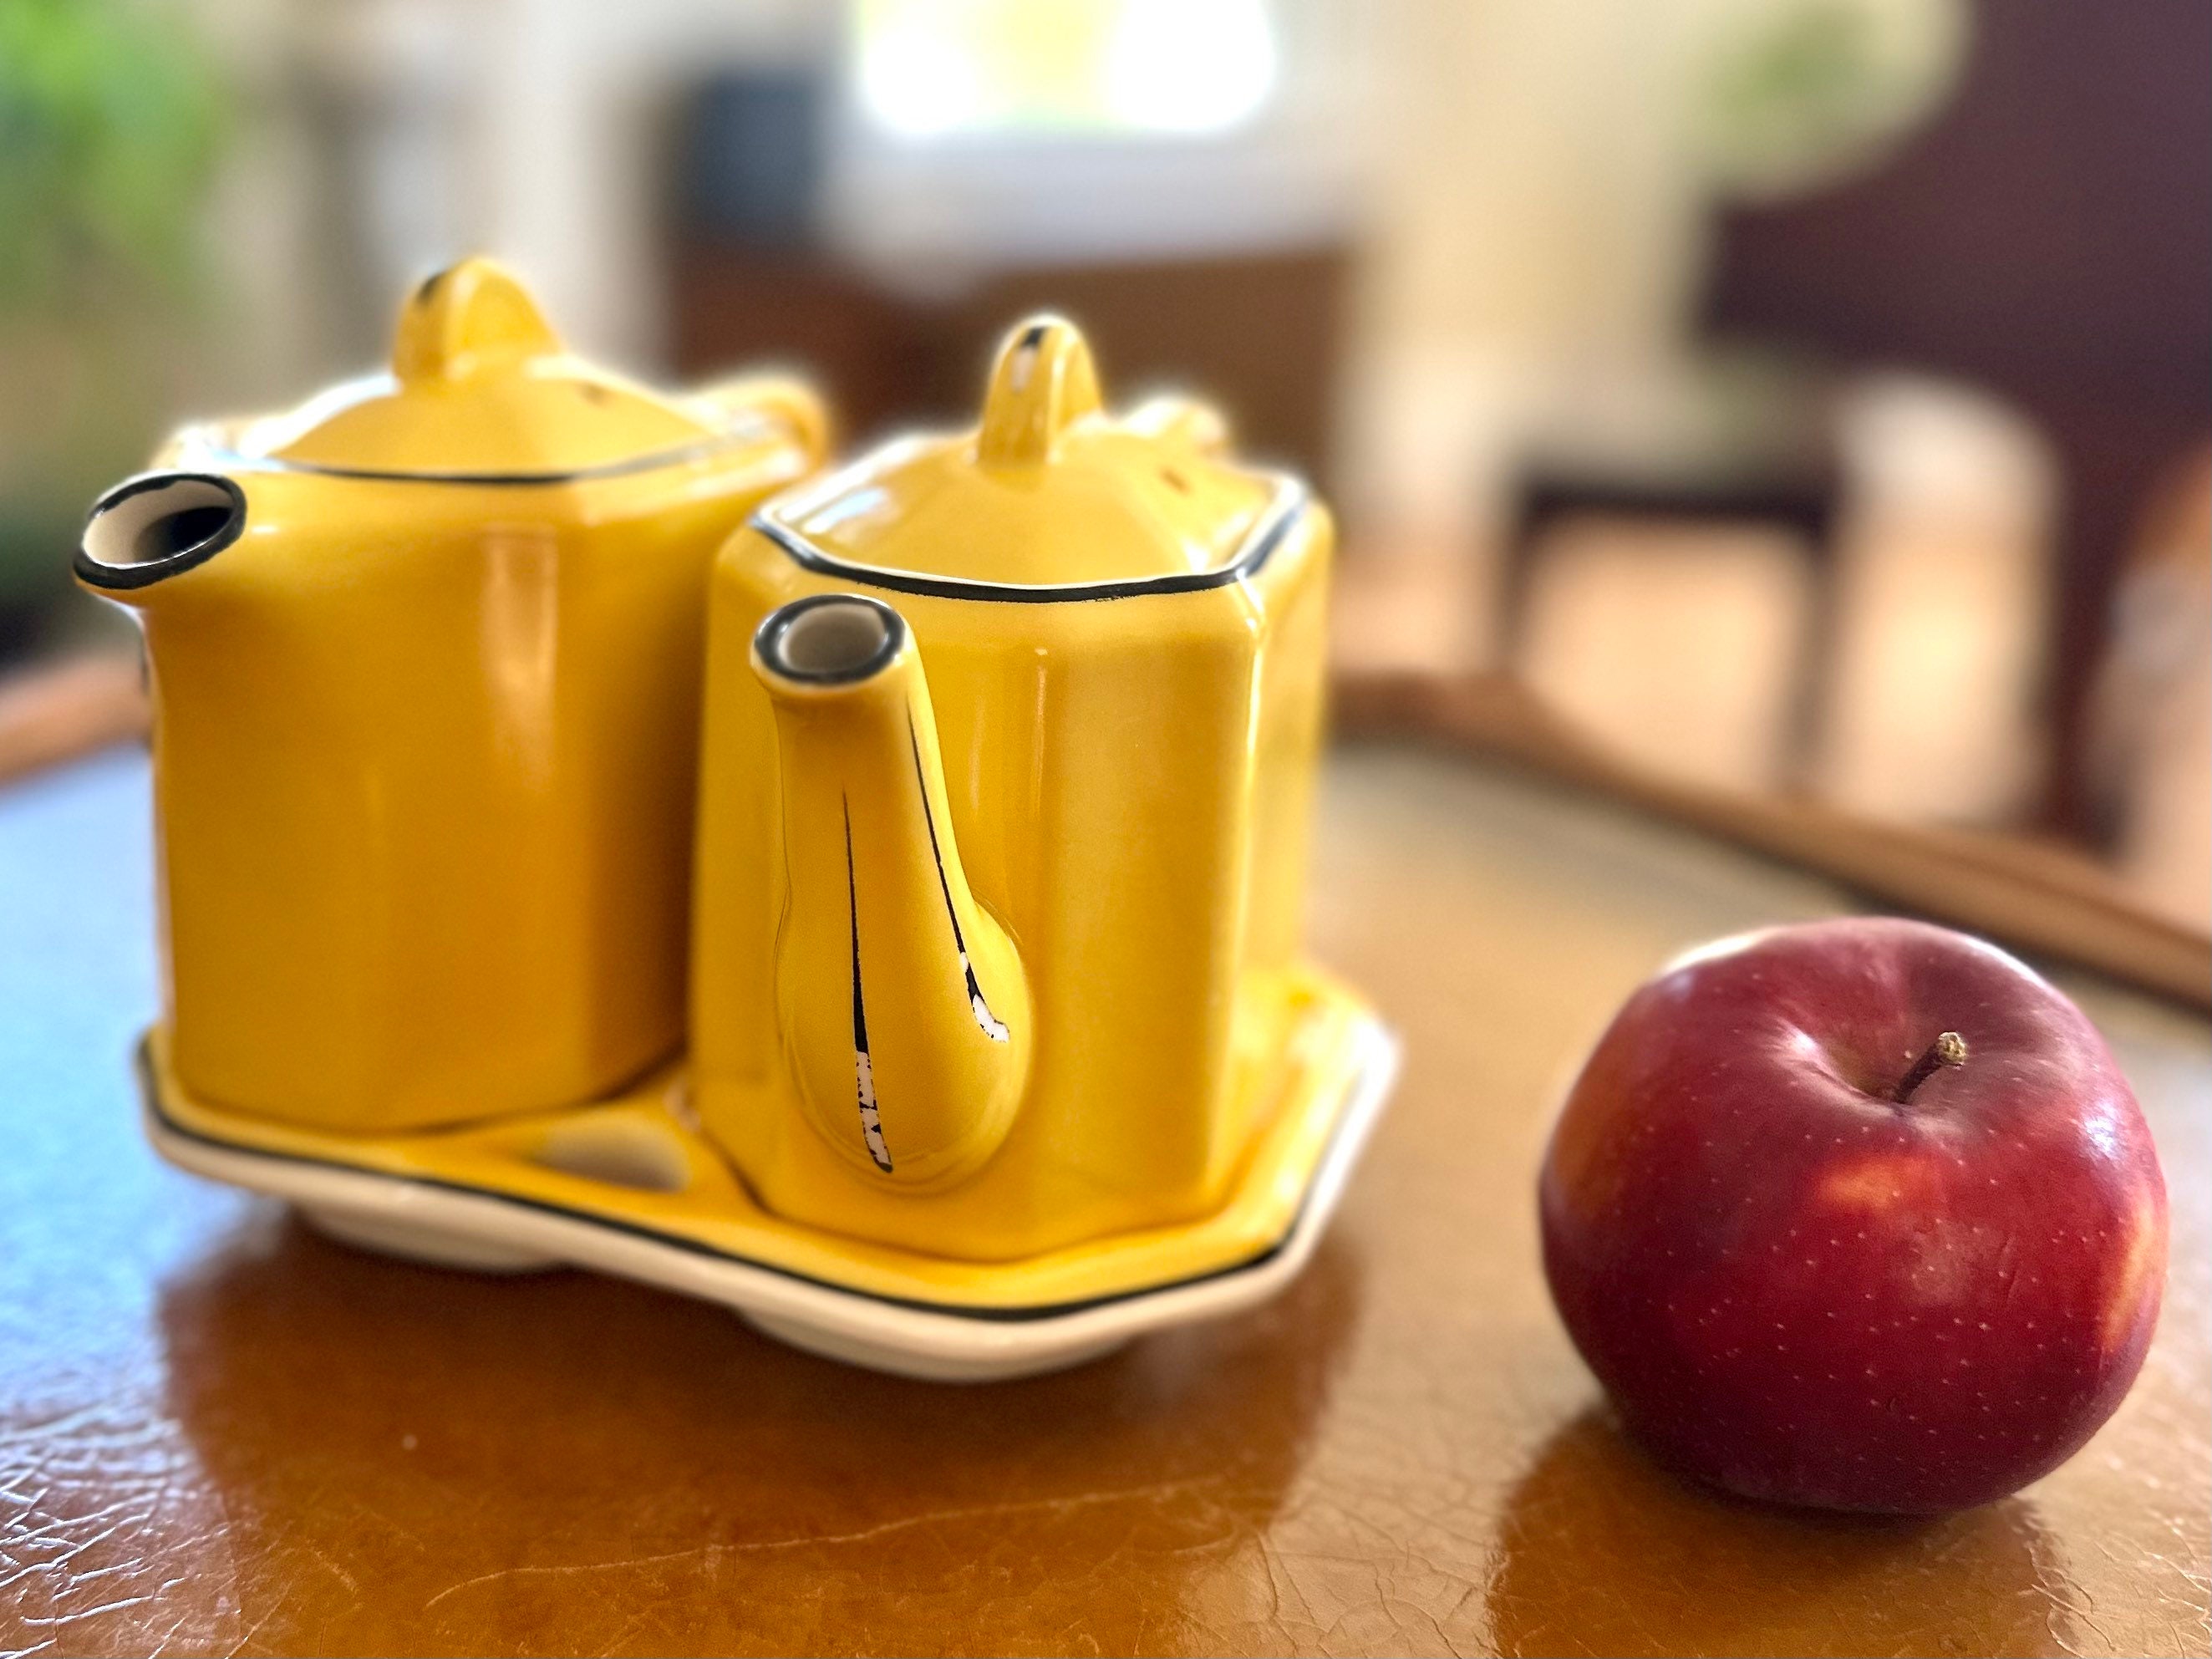 Palace Museum's Teapot and Teacup – Yellow Sweaters